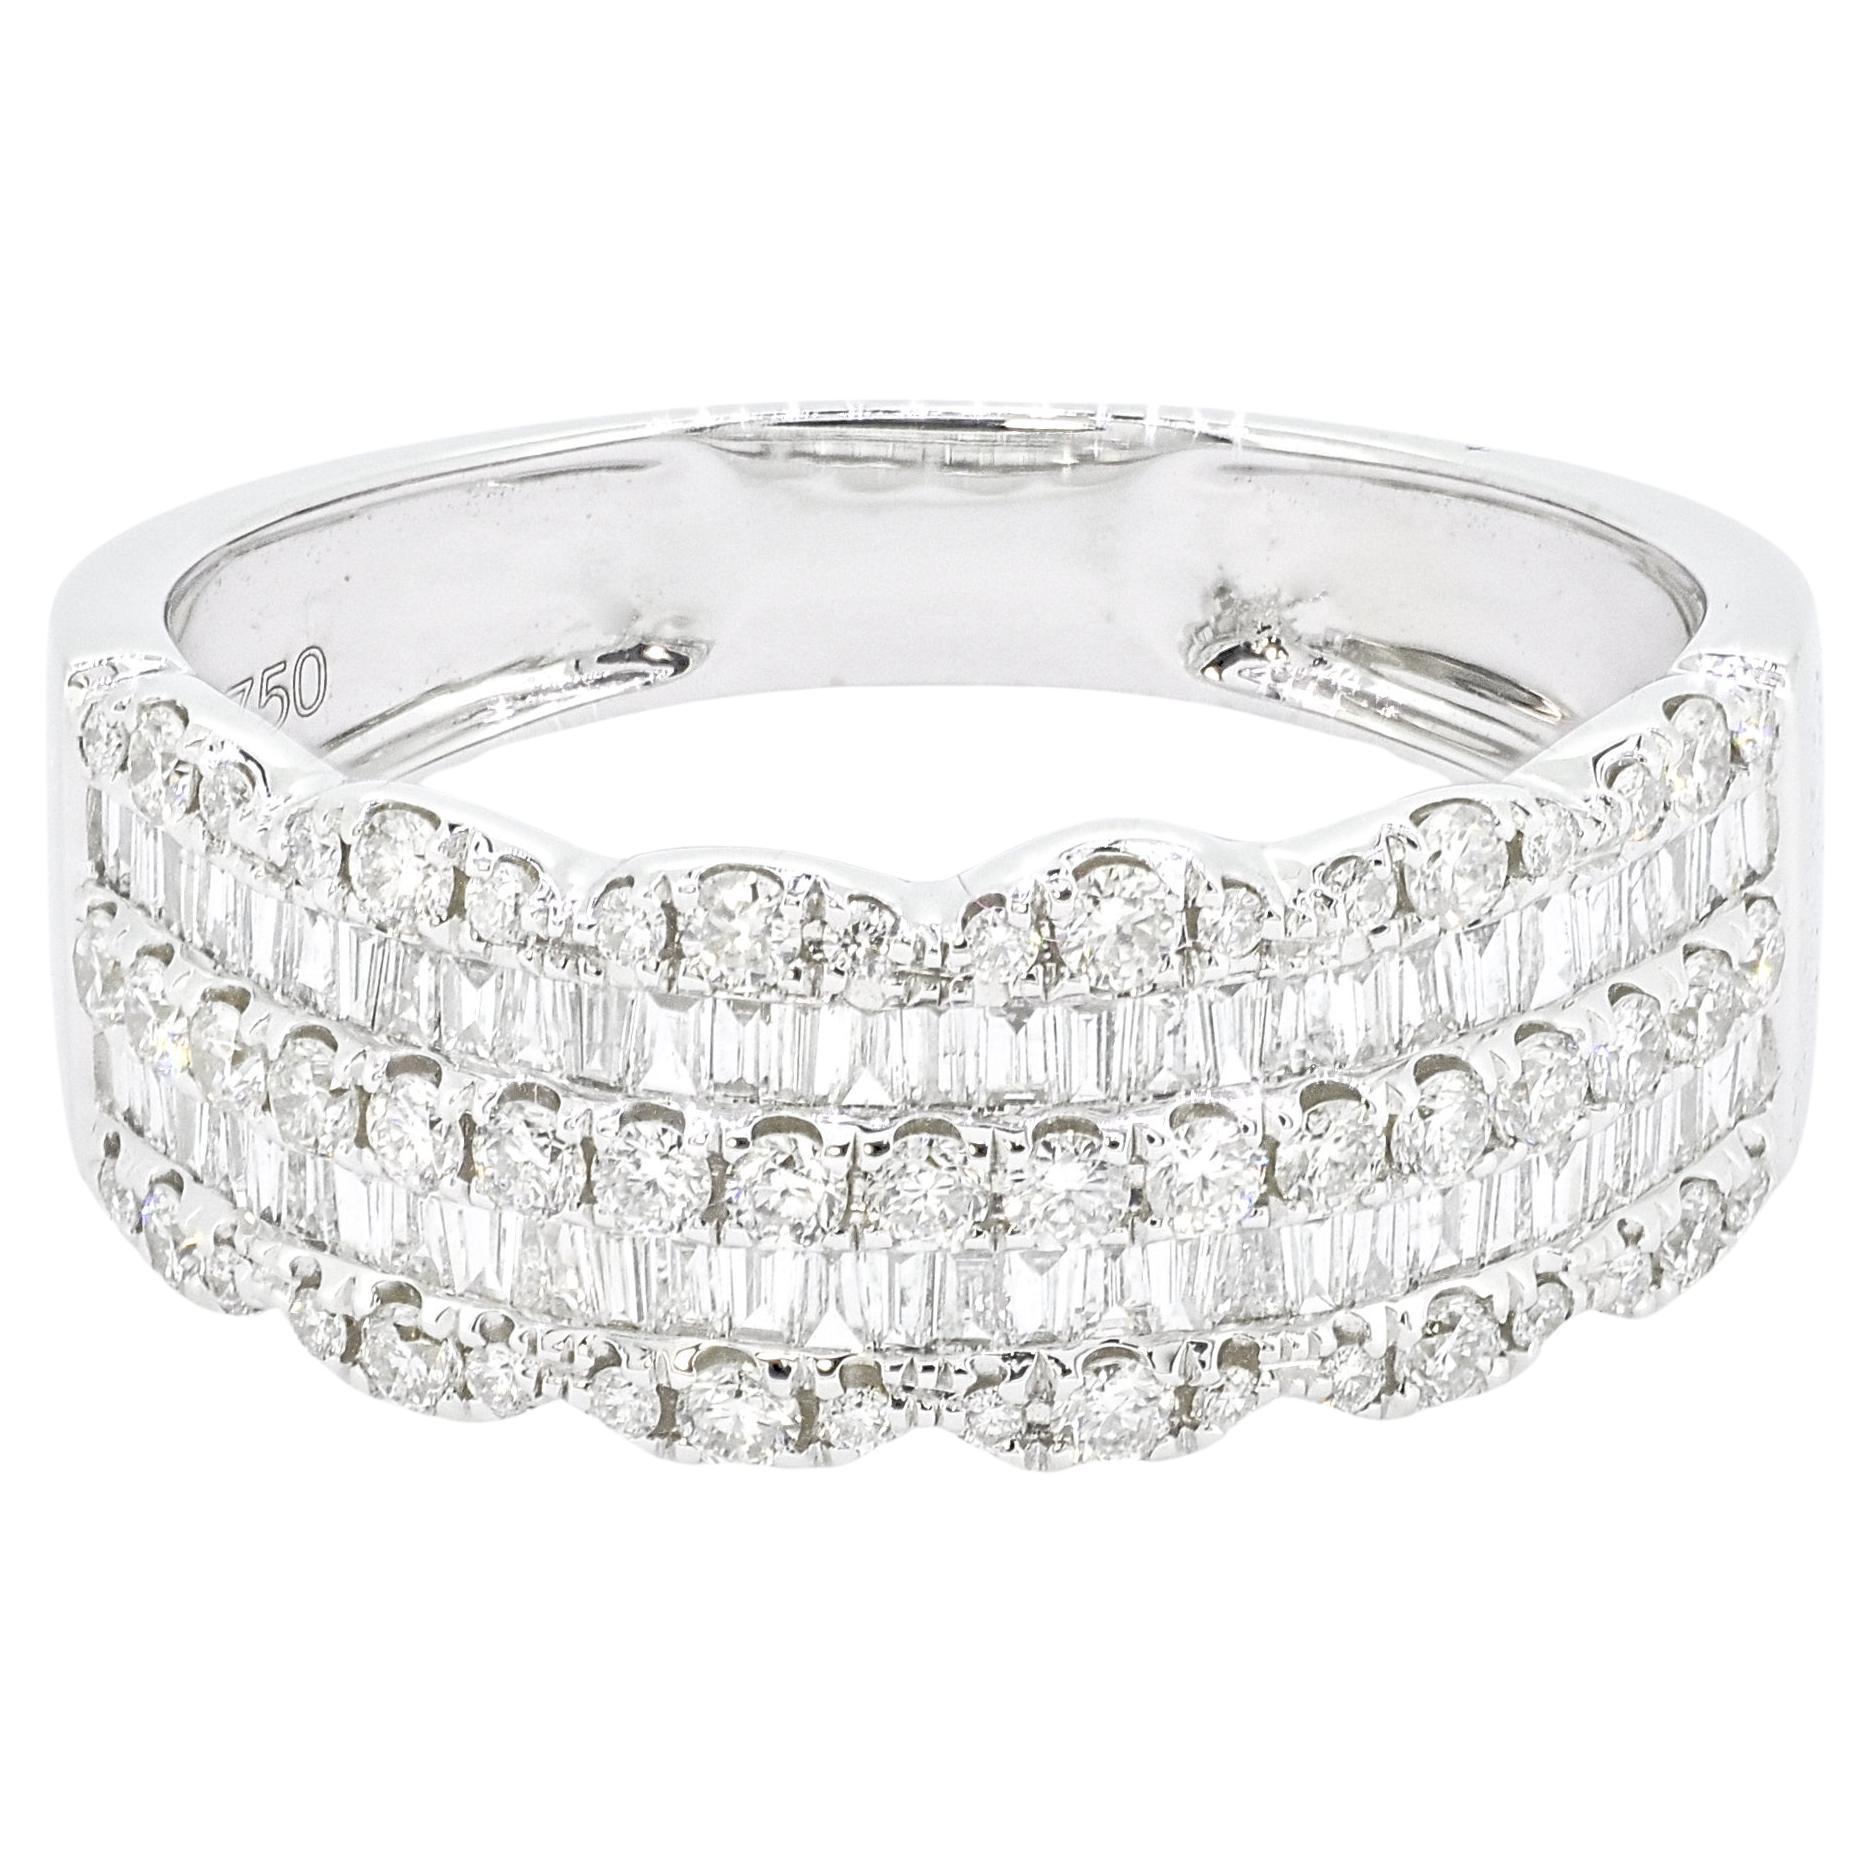 Natural Diamond Ring 0.76 carat 18KT White Gold Cocktail Half Eternity Ring Band